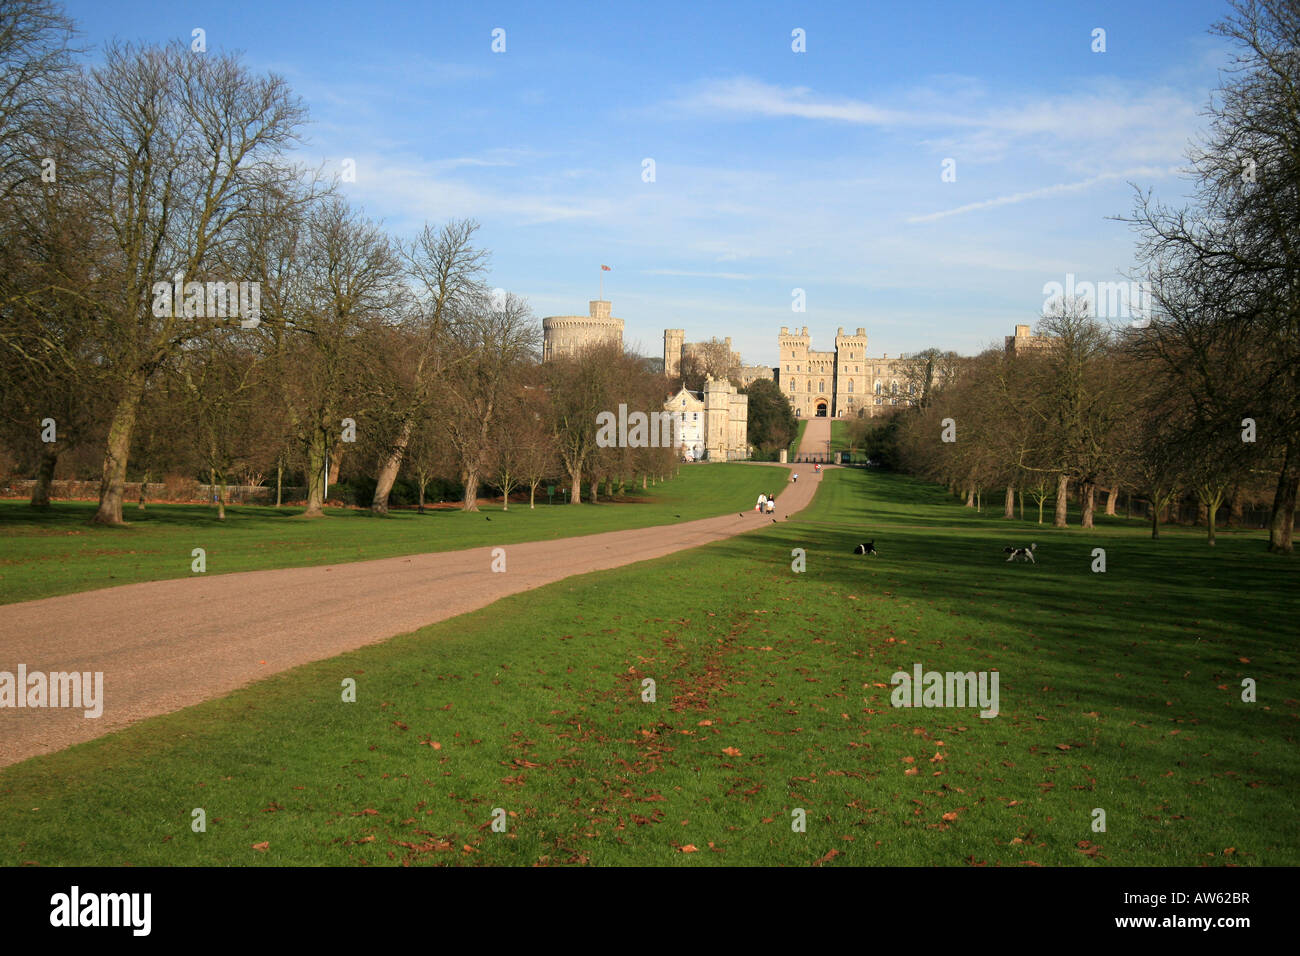 The Round Tower and State Apartments of Windsor Castle viewed from The Long Walk, Windsor Great Park, England. Stock Photo